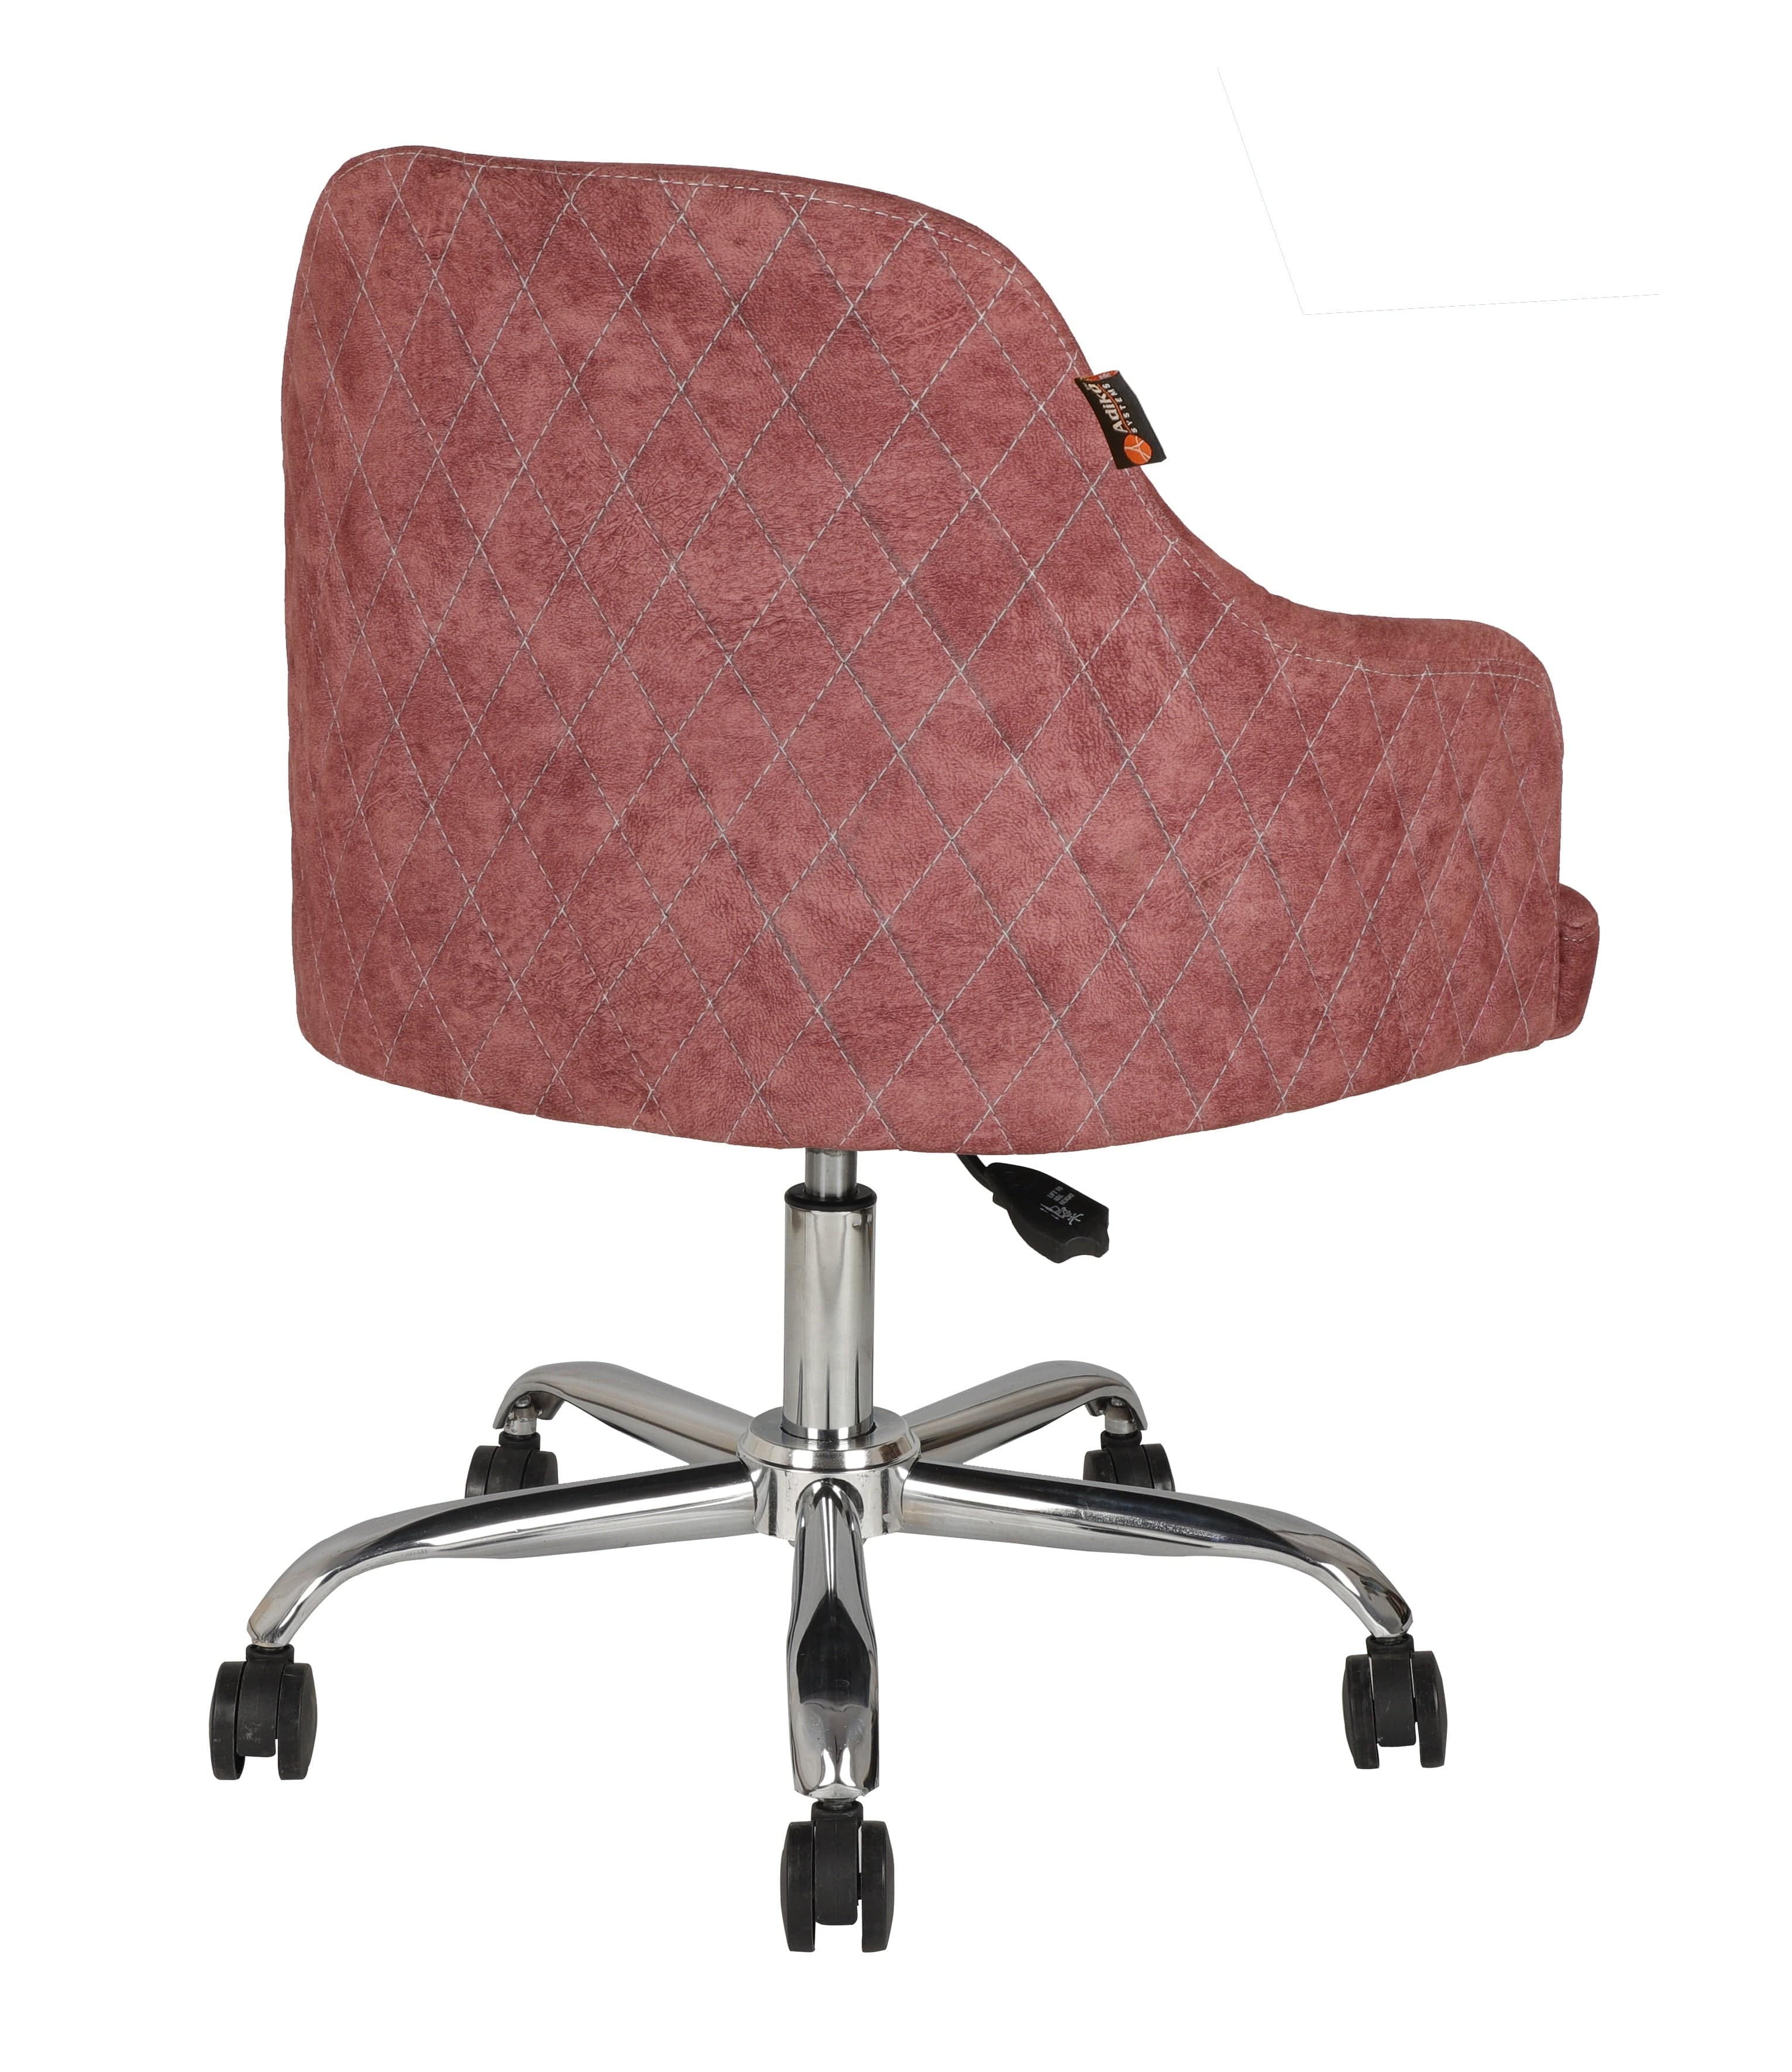 Adiko Lounge Chair in Cherry Color